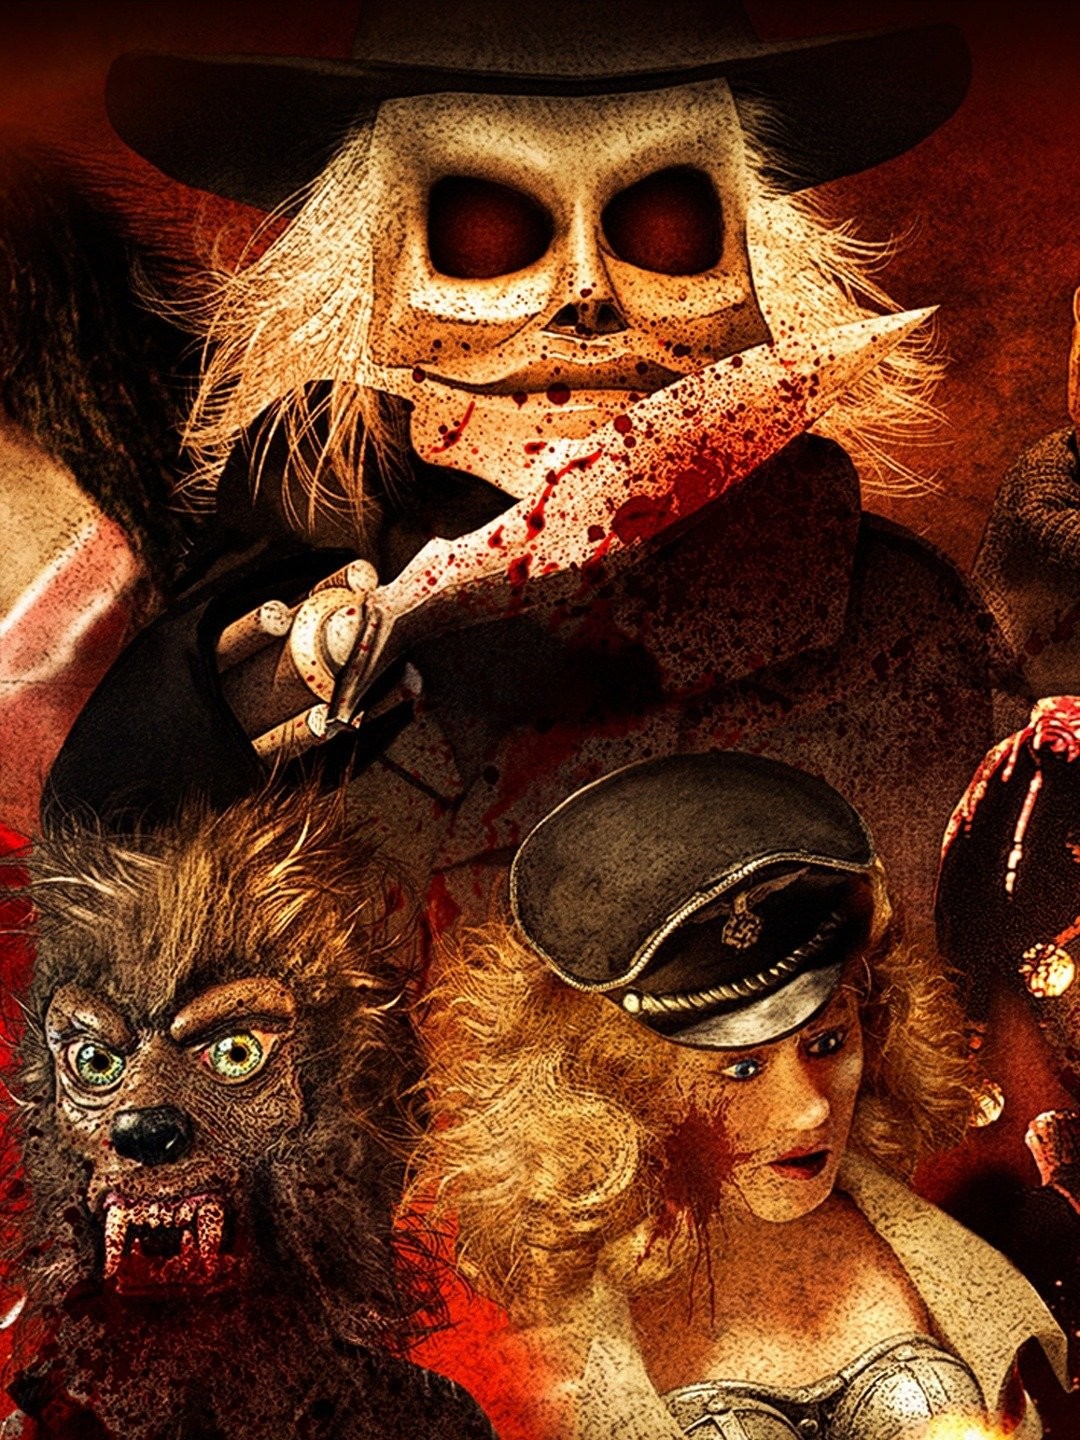 Puppet Master X: Axis Rising - Rotten Tomatoes